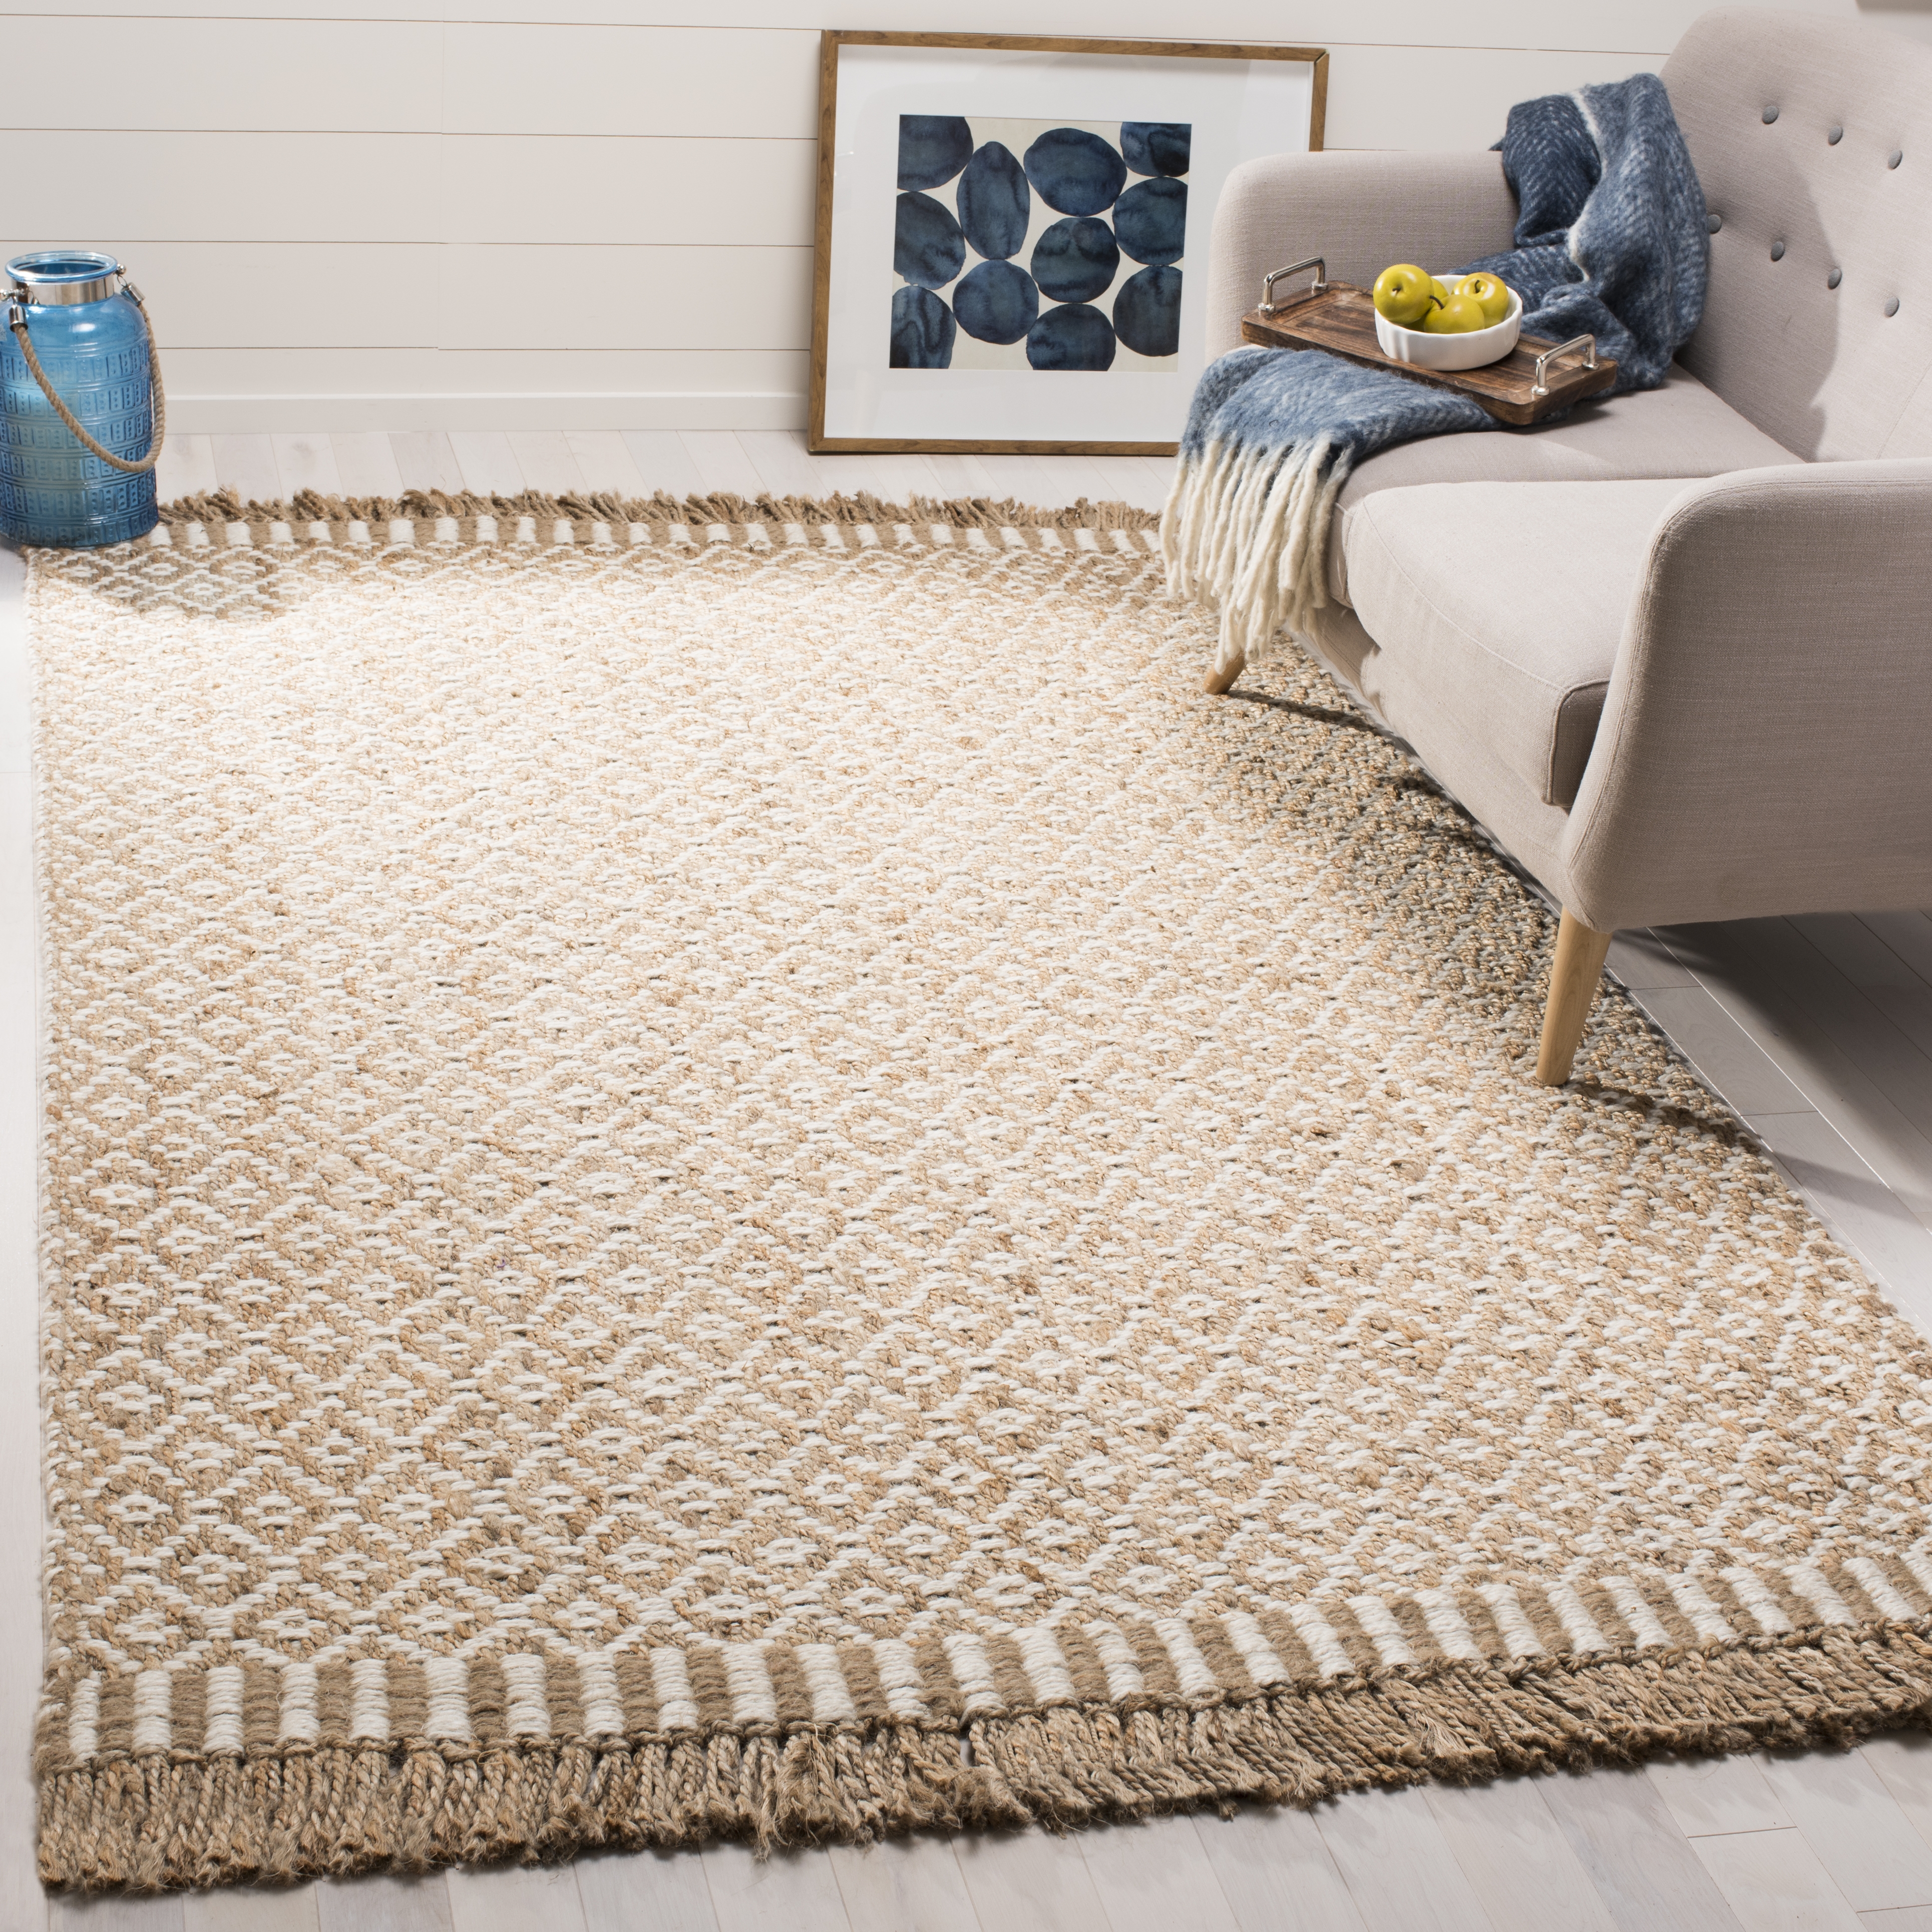 Arlo Home Hand Woven Area Rug, NF182A, Natural/Ivory,  3' X 5' - Image 1